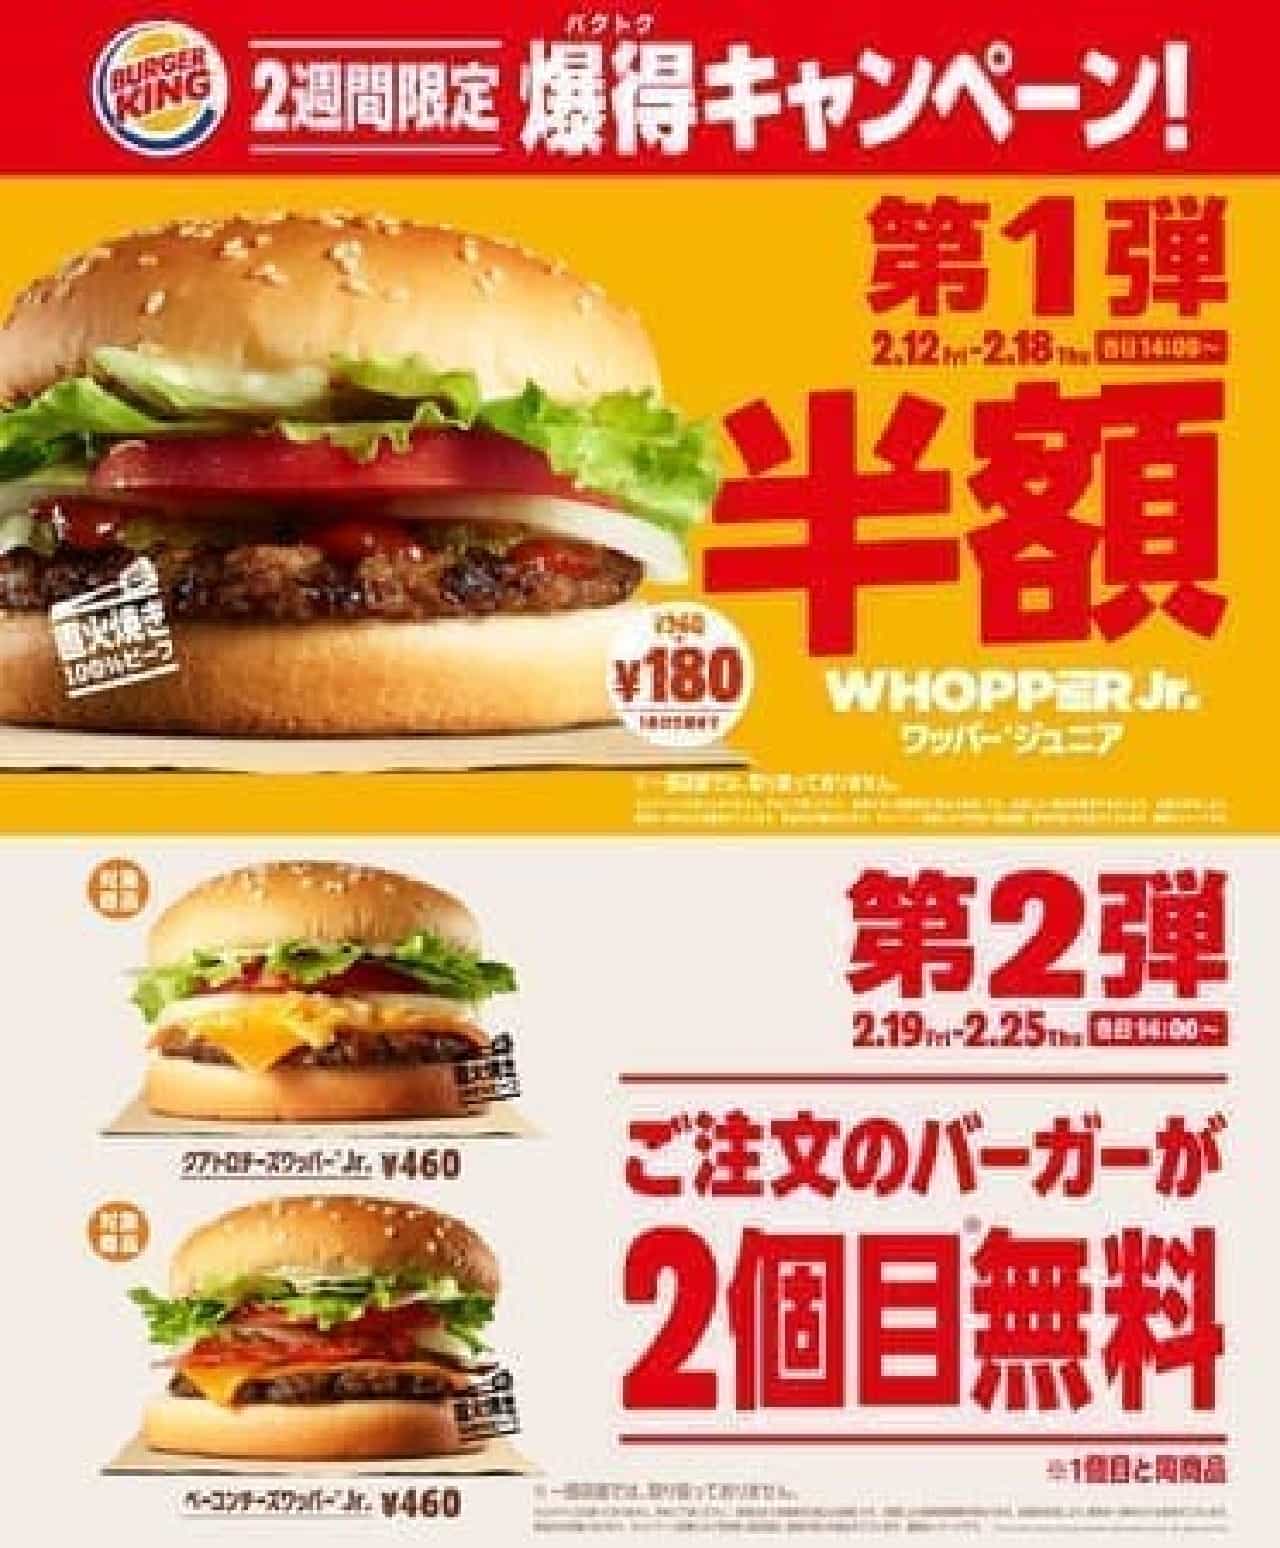 Burger King "Explosion Campaign"